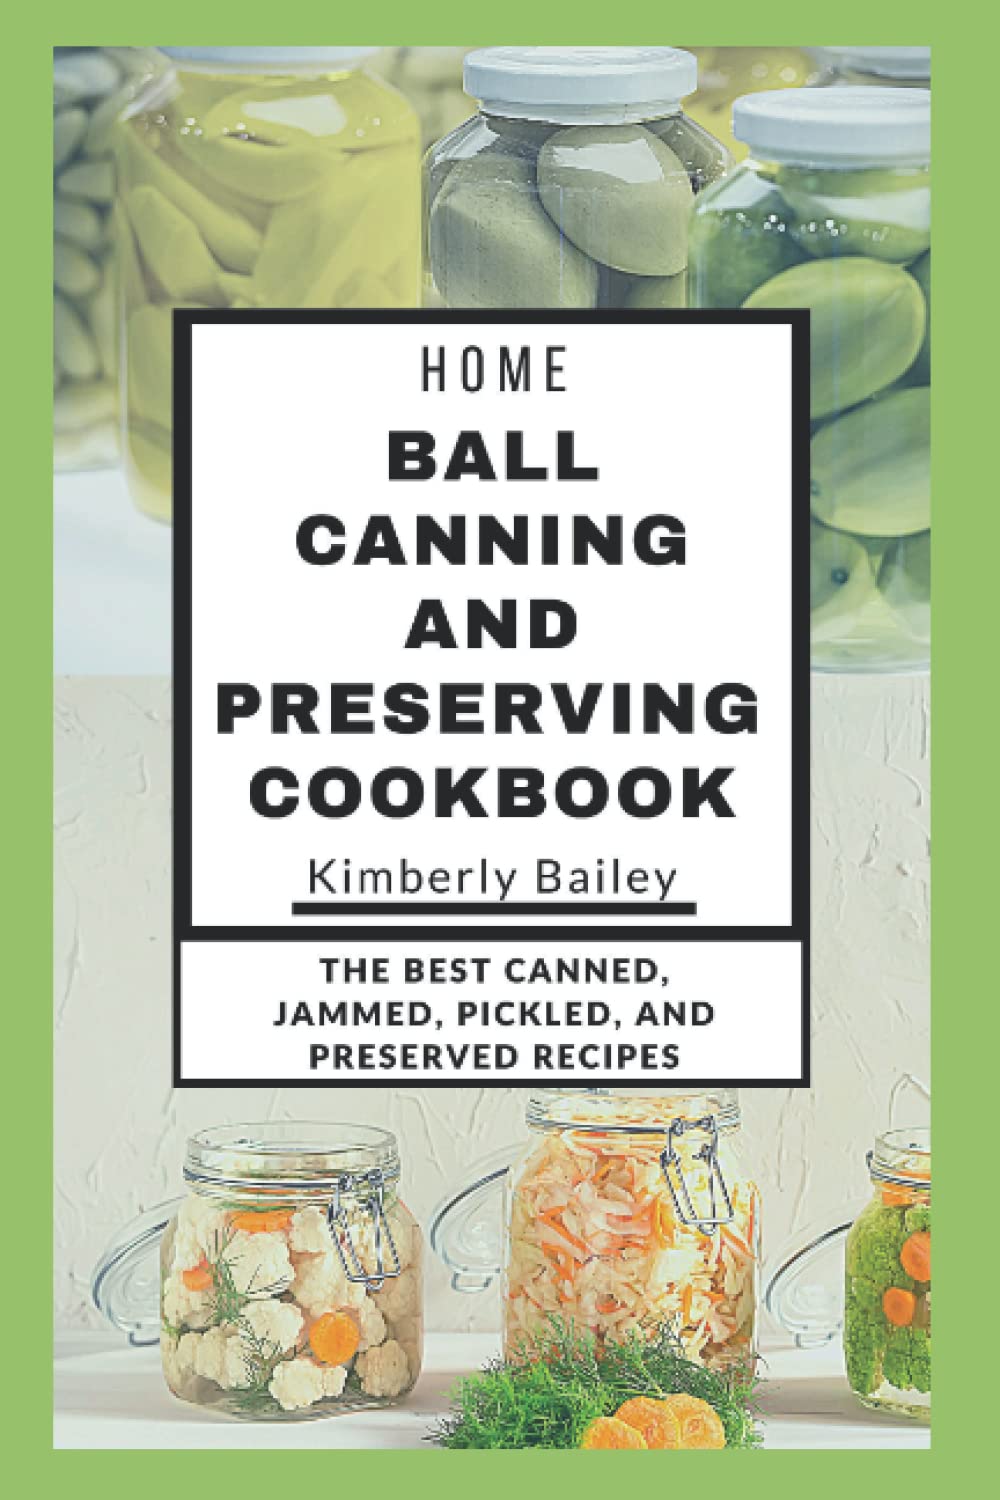 HOME BALL CANNING AND PRESERVING COOKBOOK: The Ultimate Pressure Canning Cookbook for Beginners and its also a Homestead Canning Cookbook which … of various Jams, Jelly, Vegetable and more..